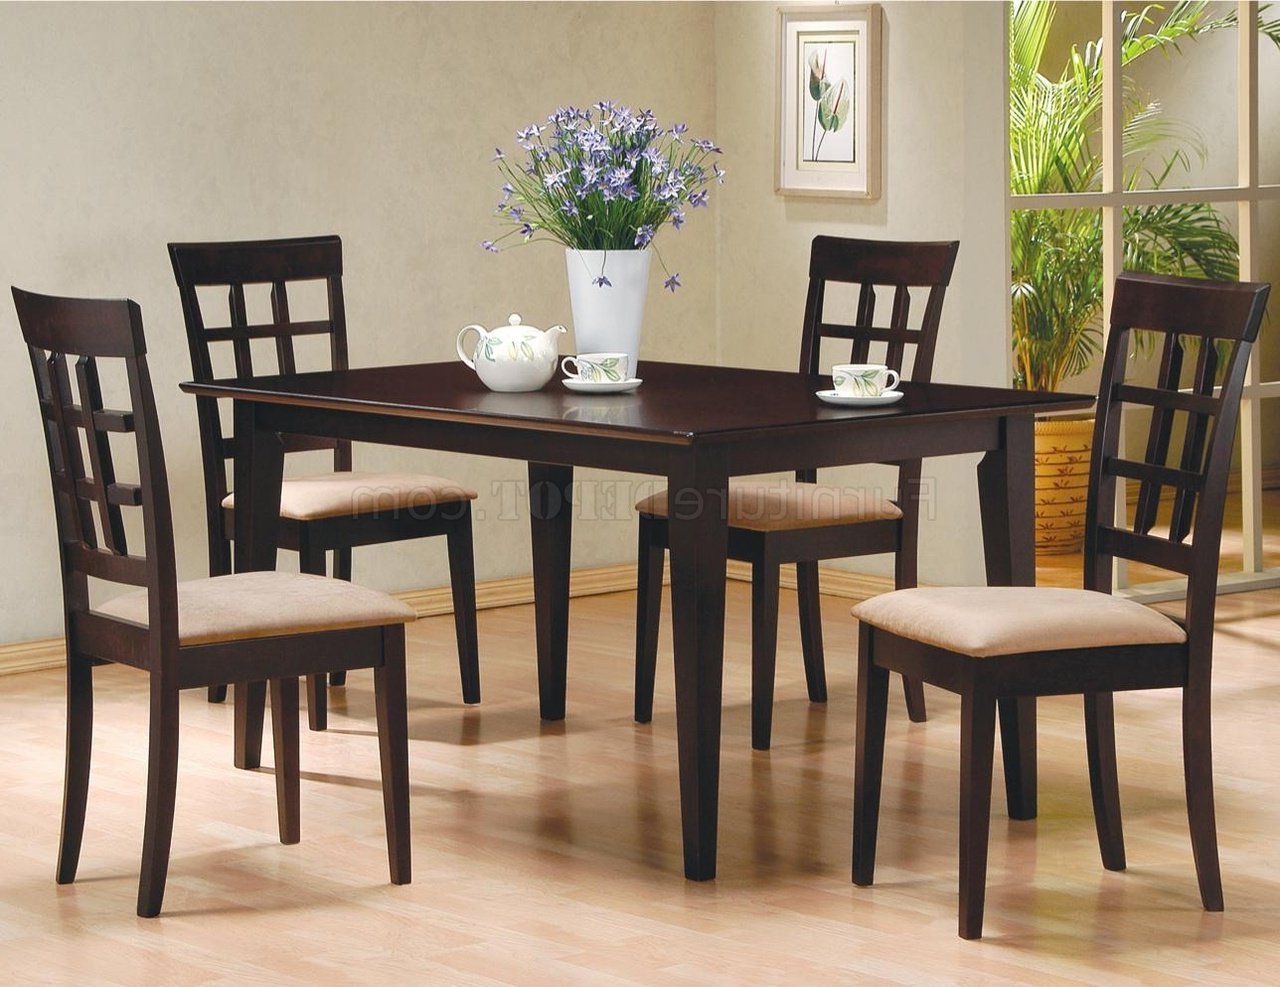 Cappuccino Finish Elegant Dinette With Soft Microfiber Seats In Most Up To Date Medium Elegant Dining Tables (View 18 of 25)